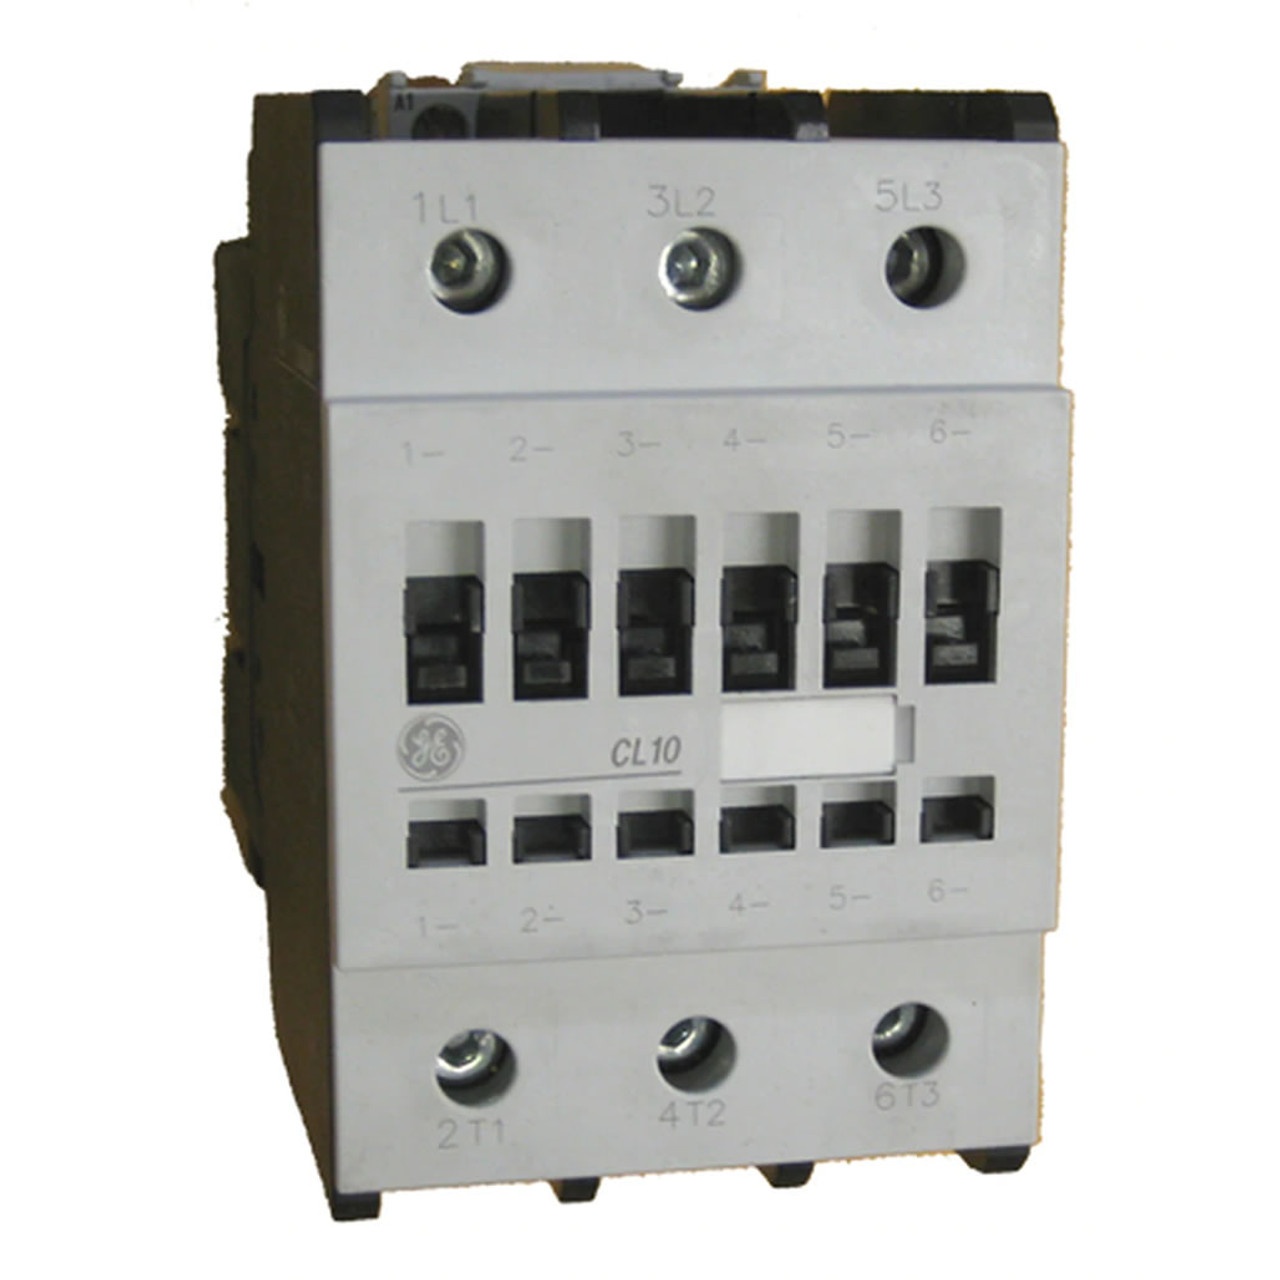 GE CL10A311M contactor